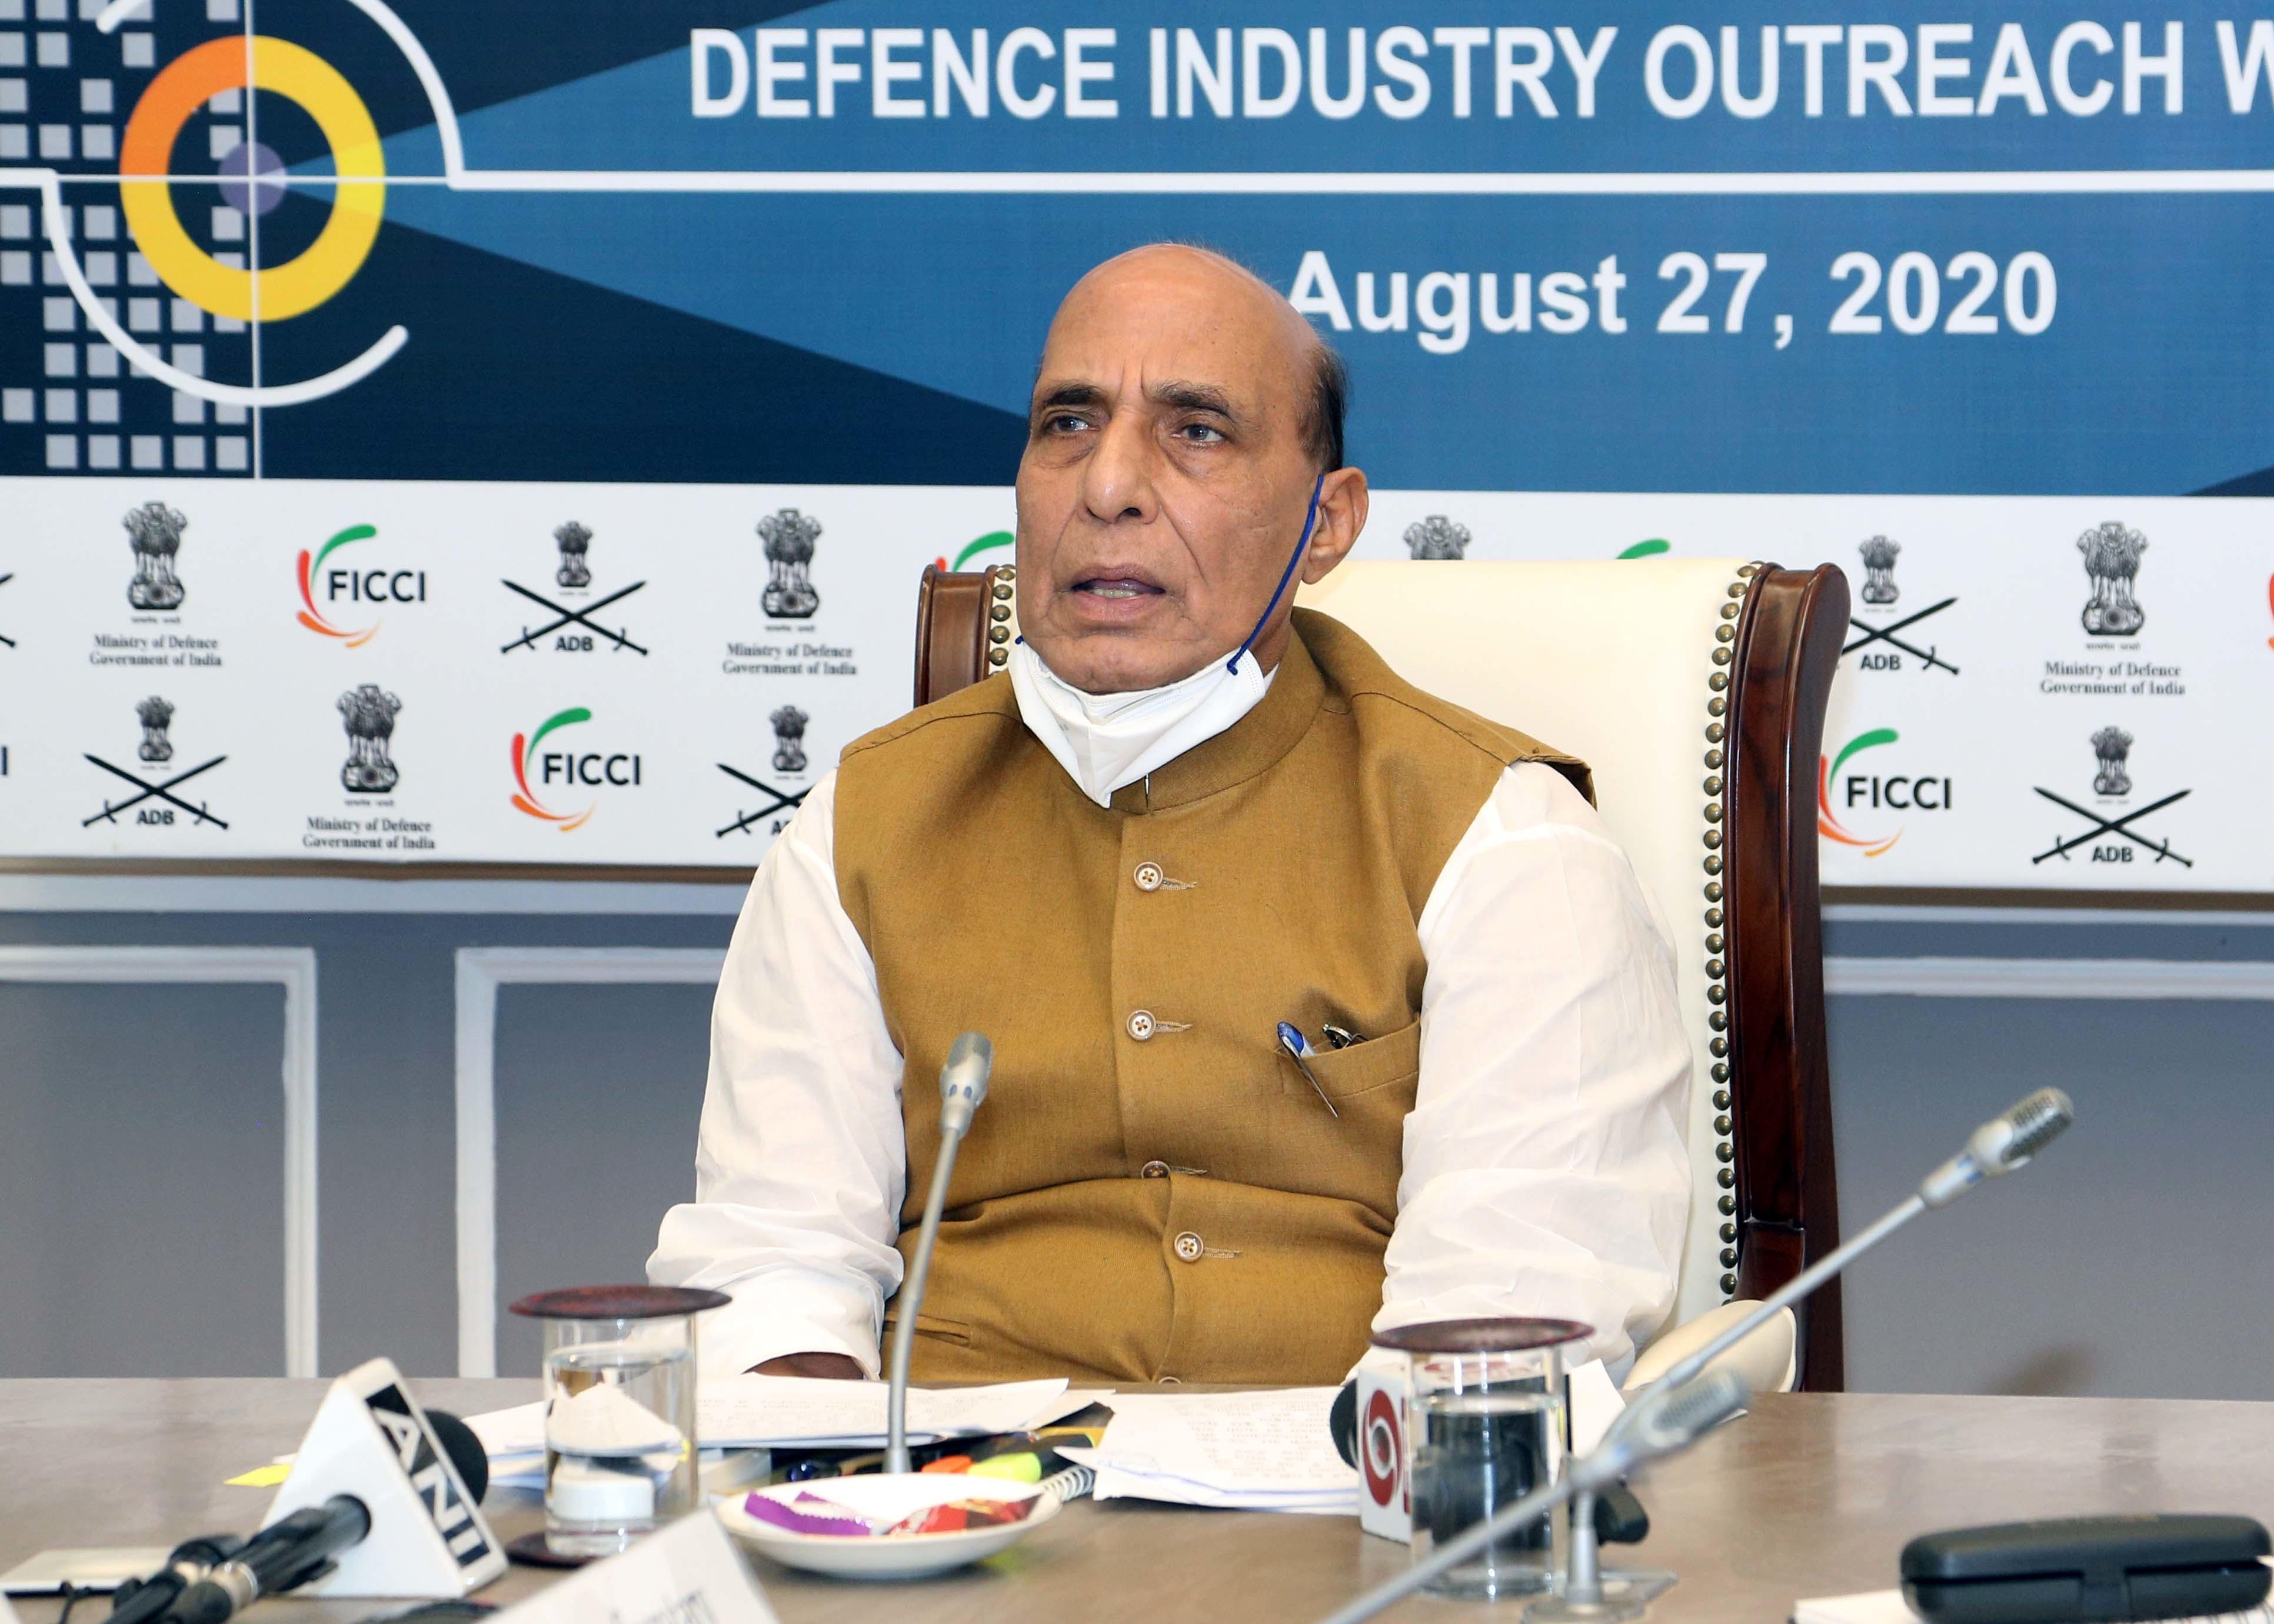 India wants to become self-reliant in defence manufacturing: Rajnath Singh